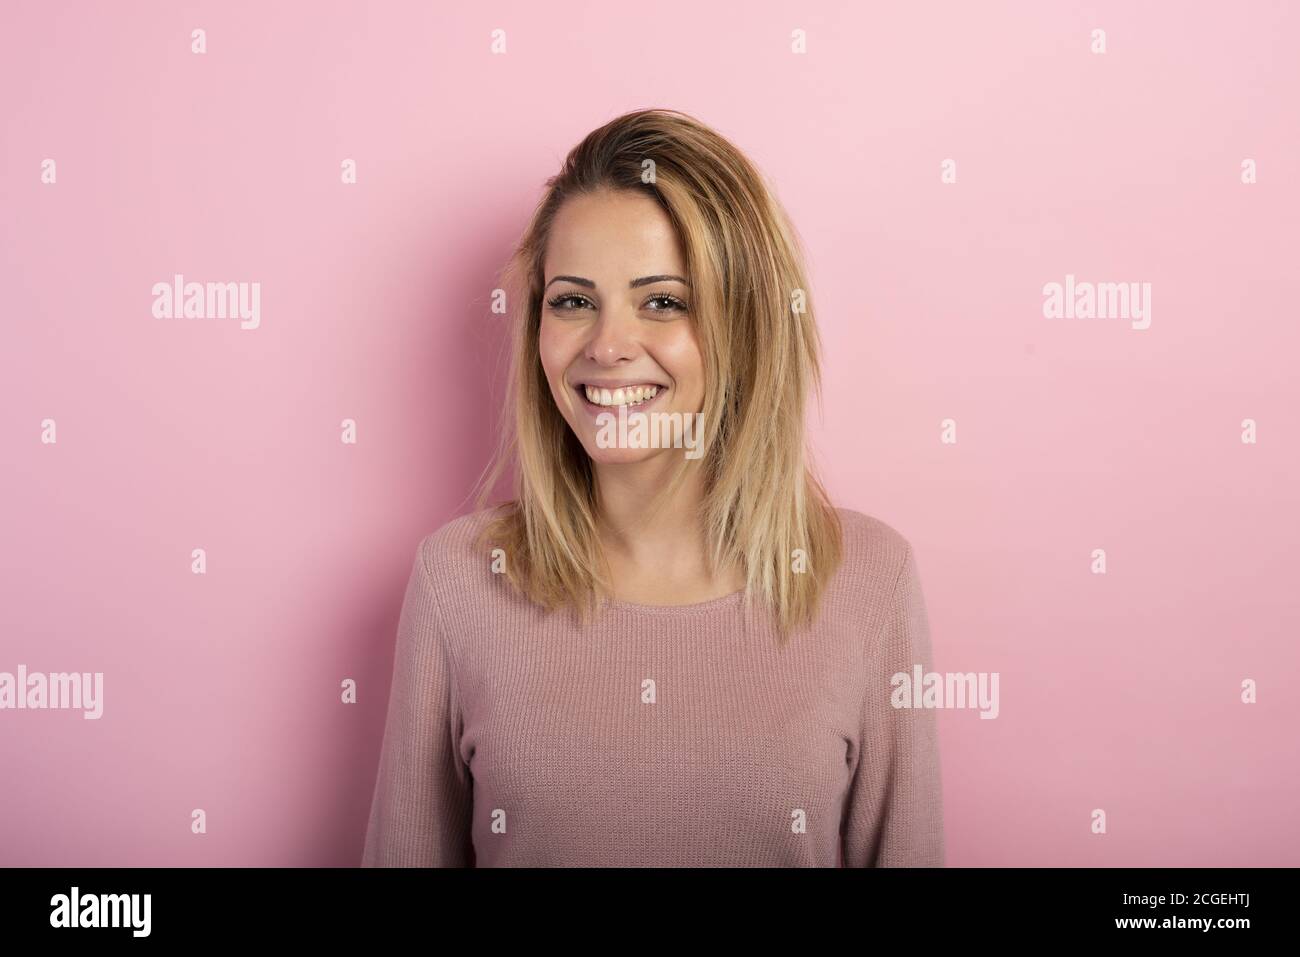 Happy and positive blonde girl against a pink background Stock Photo